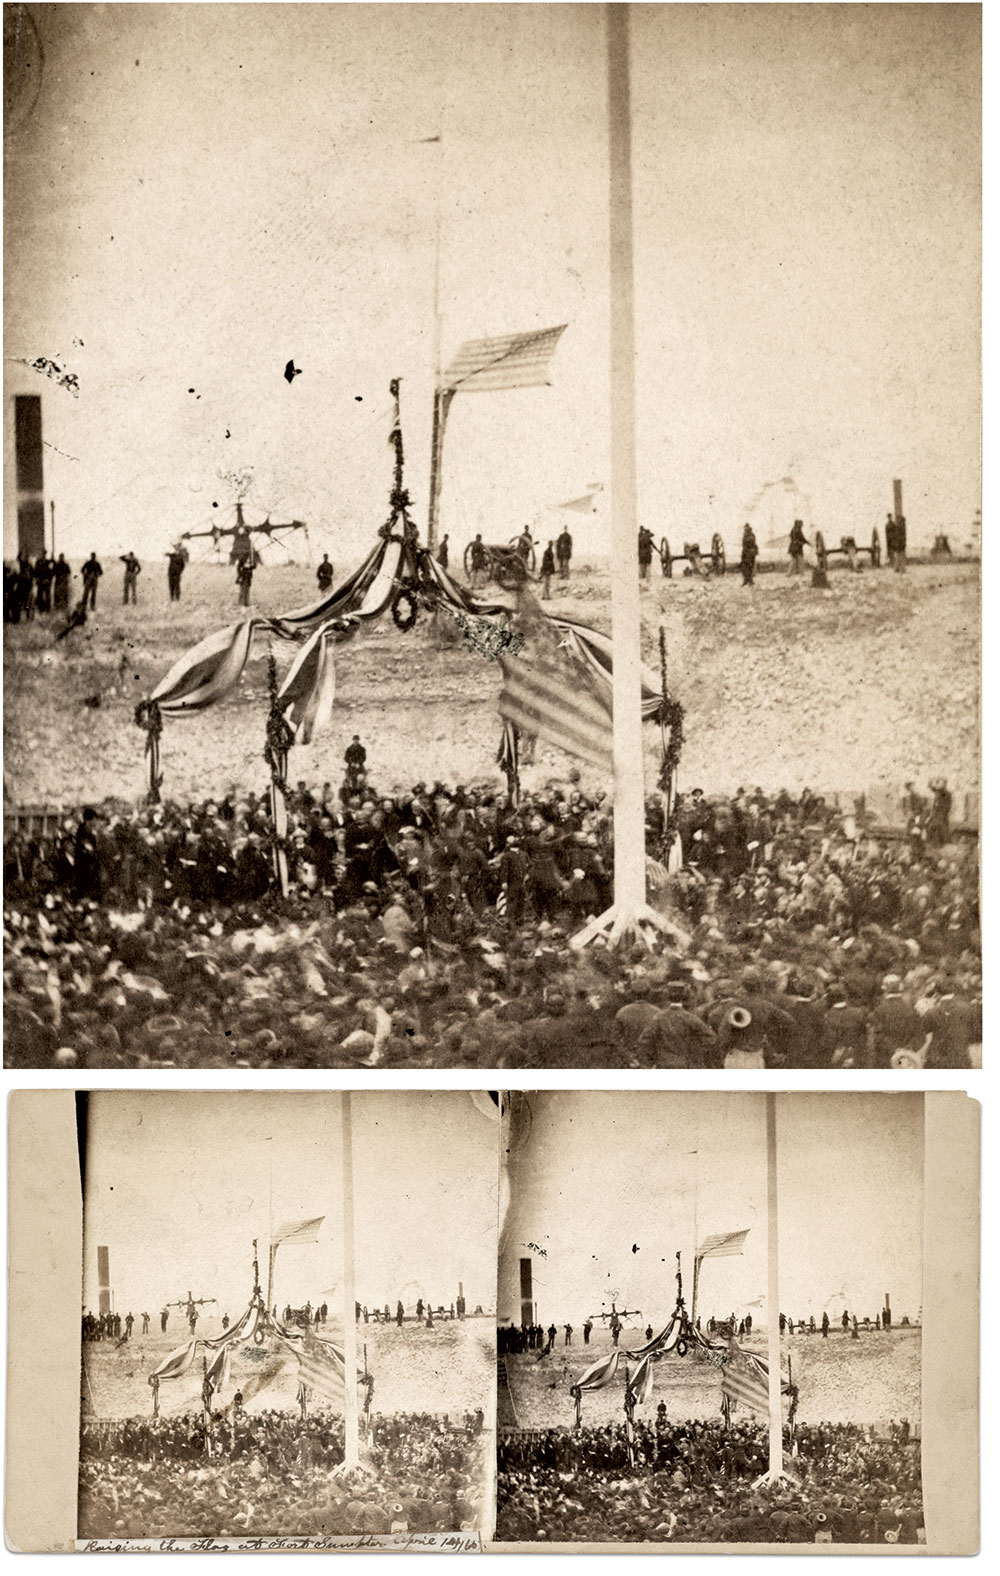 This half of a stereo card credited to photographer William E. James of Brooklyn, N.Y., contains the same imperfection obscuring part of the canopy and flag in the relic’s carte de visite. Library of Congress.